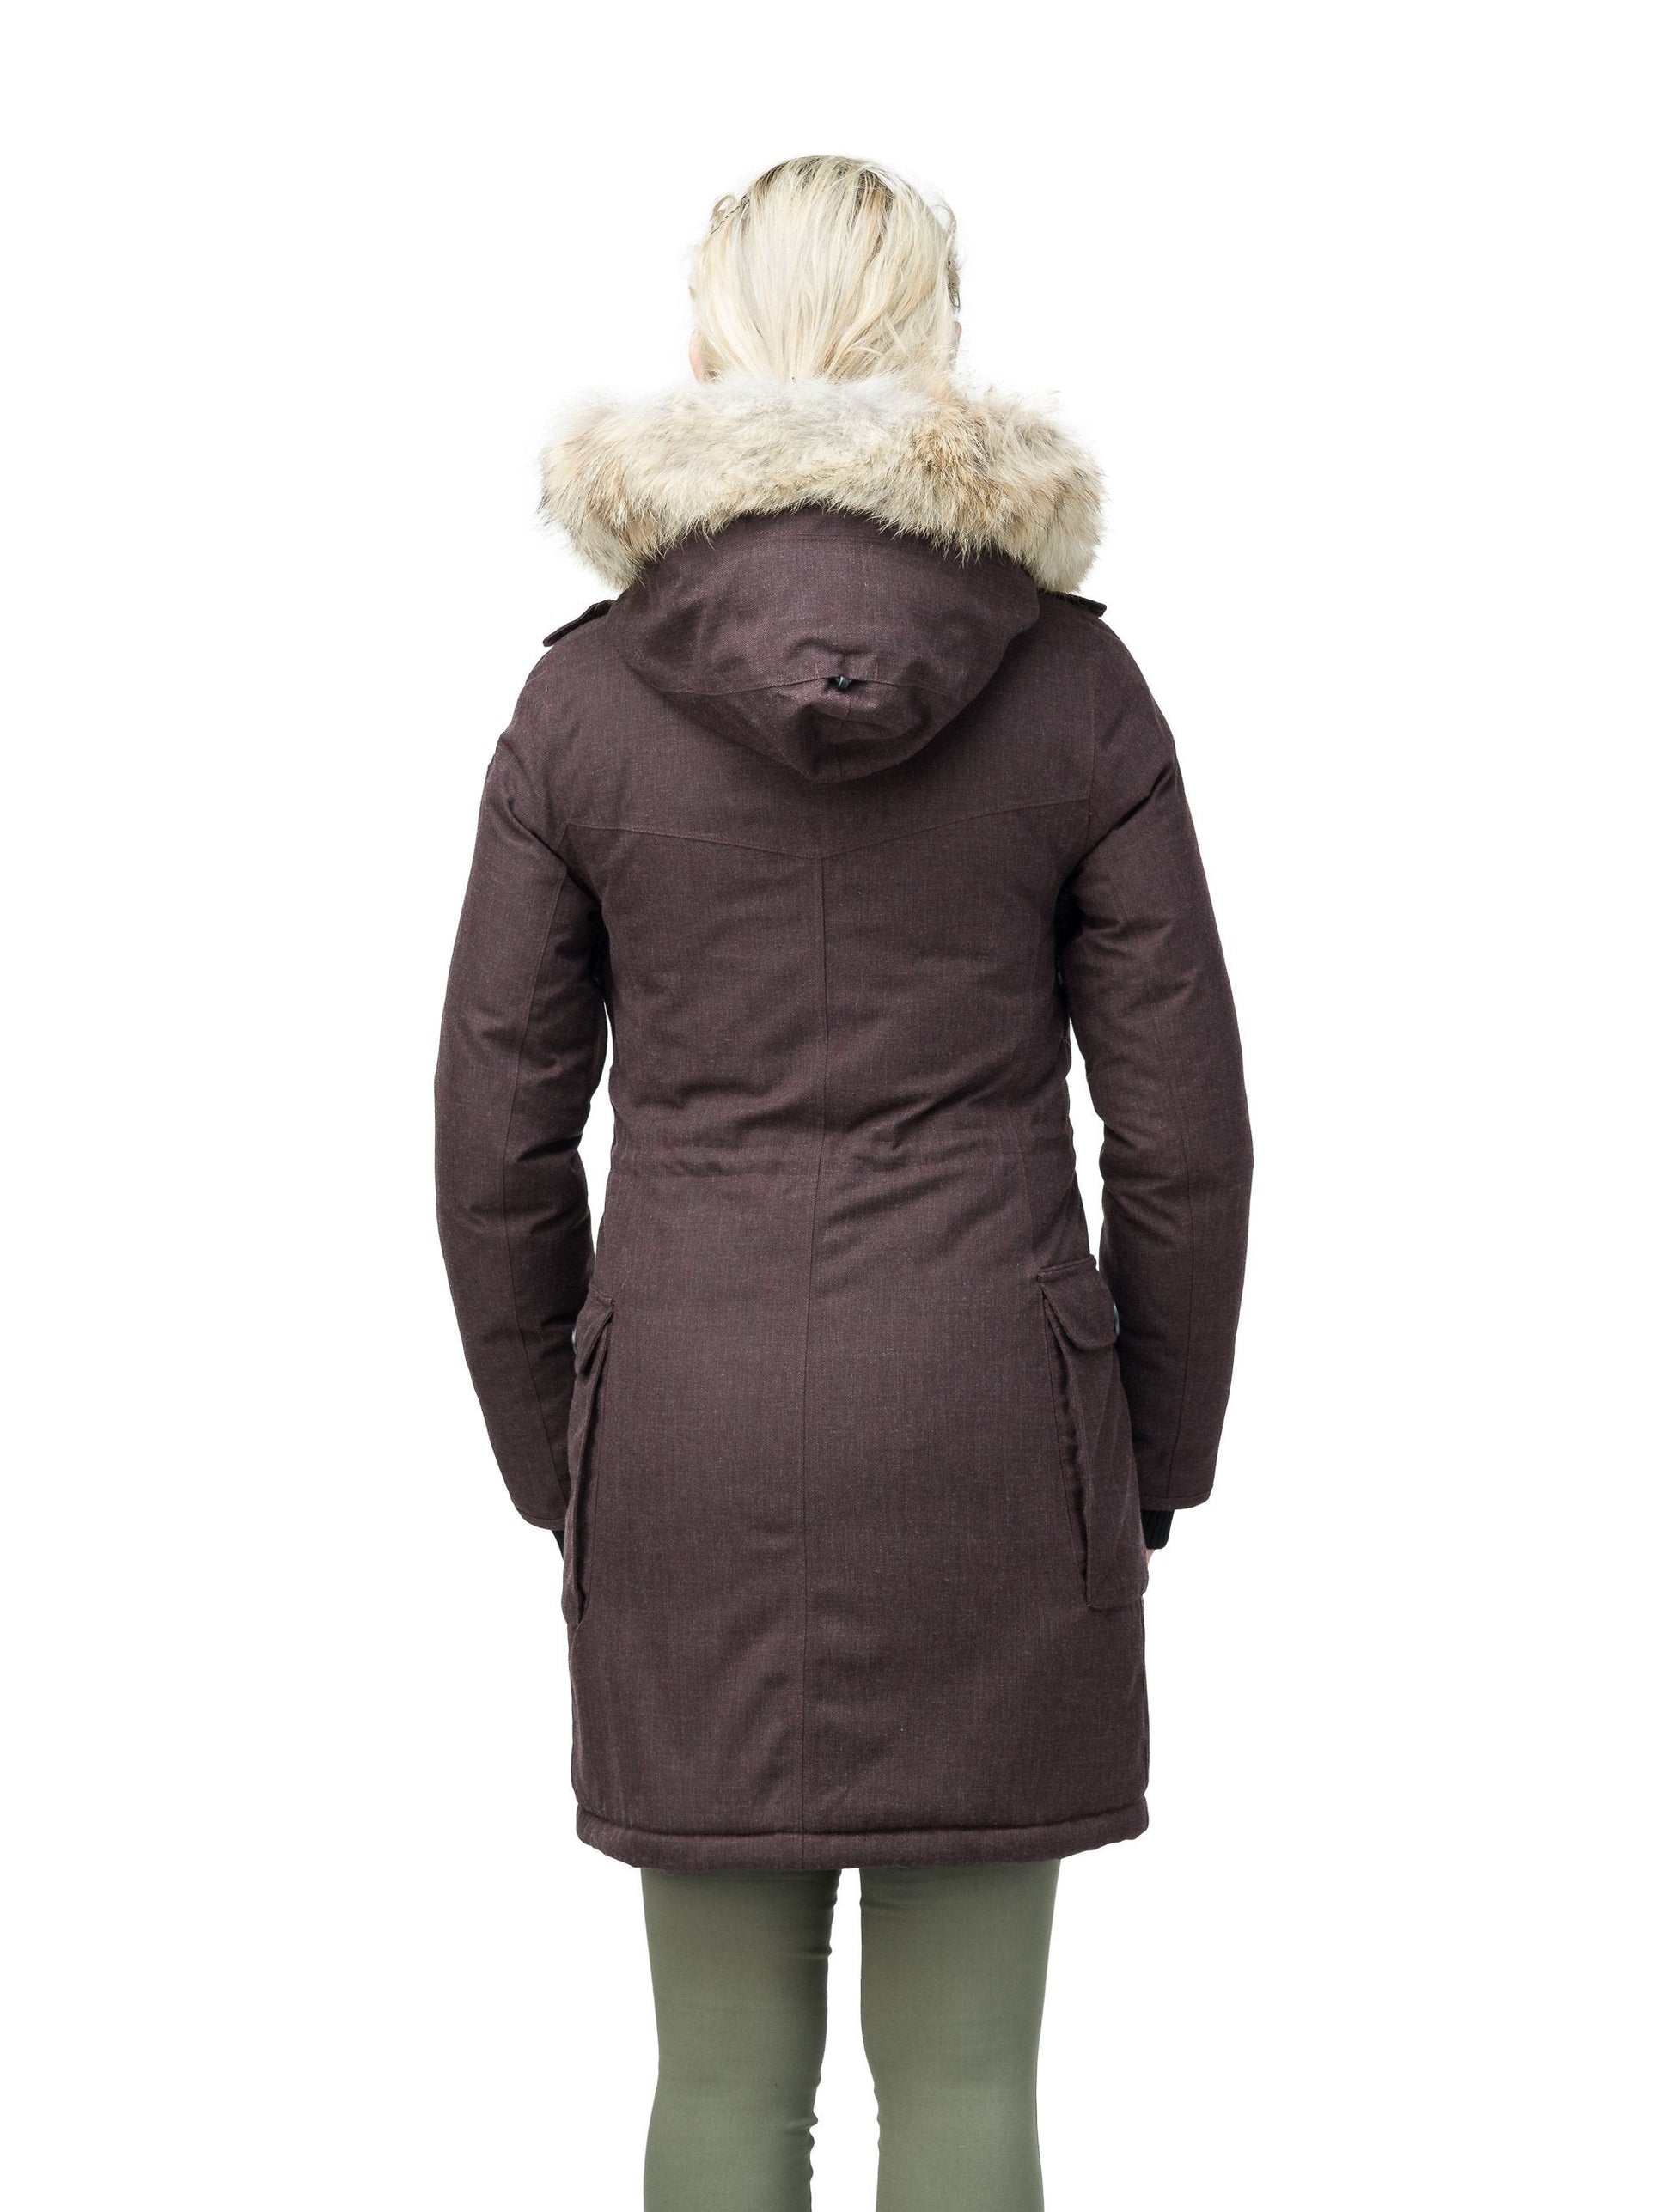 Women's knee length down filled parka with fur trim hood in H. Burgundy